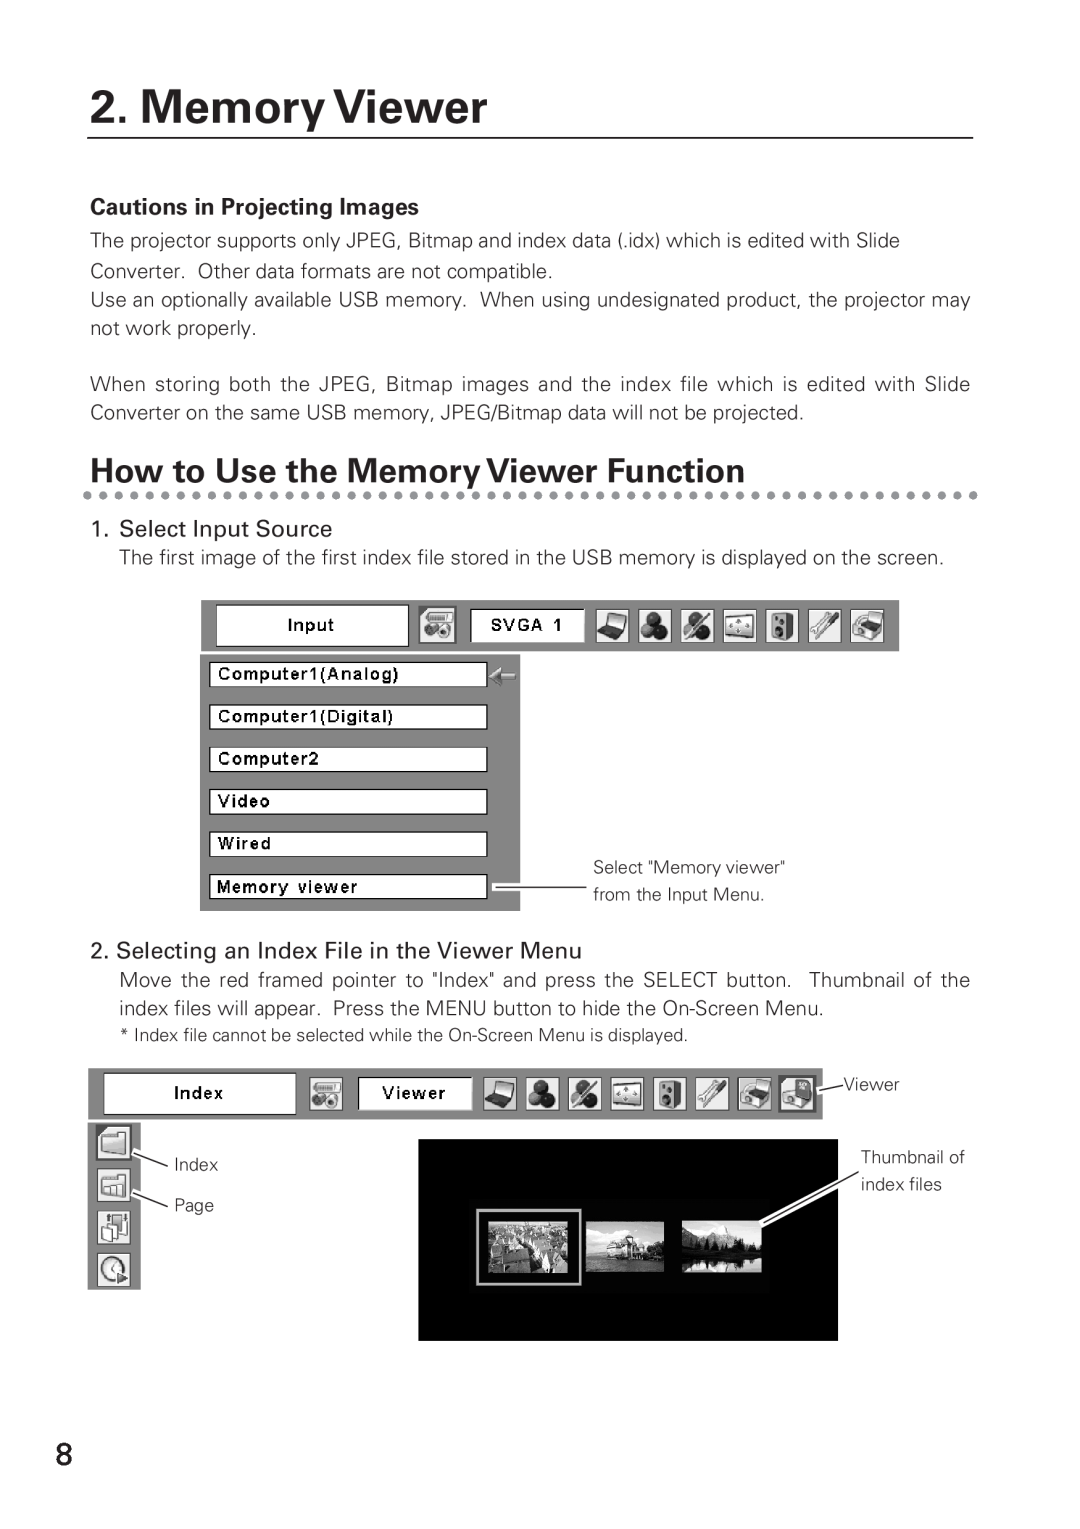 Eiki WL-10 owner manual How to Use the Memory Viewer Function, Cautions in Projecting Images, Select Input Source 